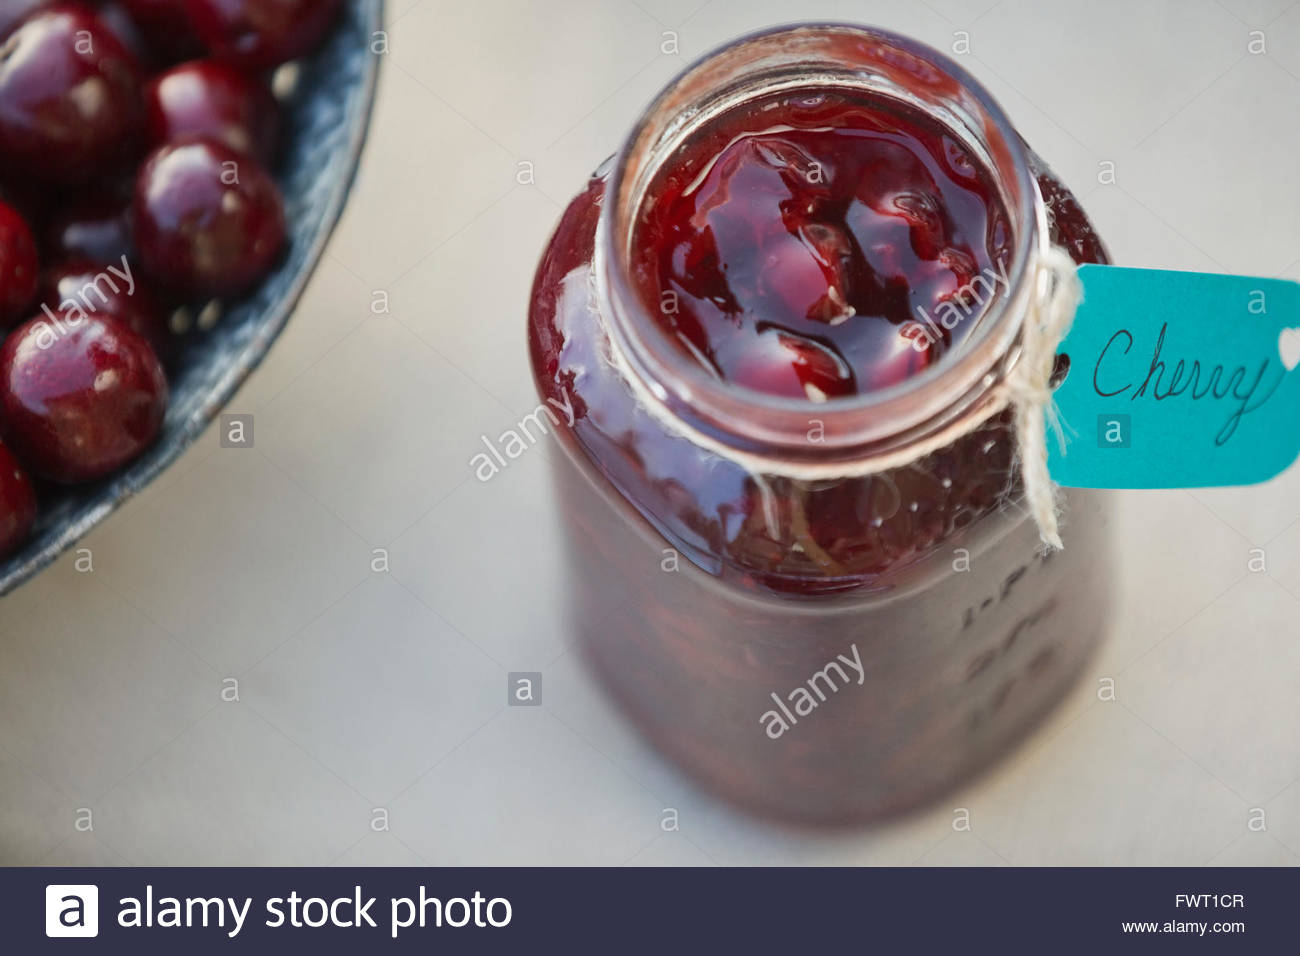 Canned cherry preserves Stock Photo